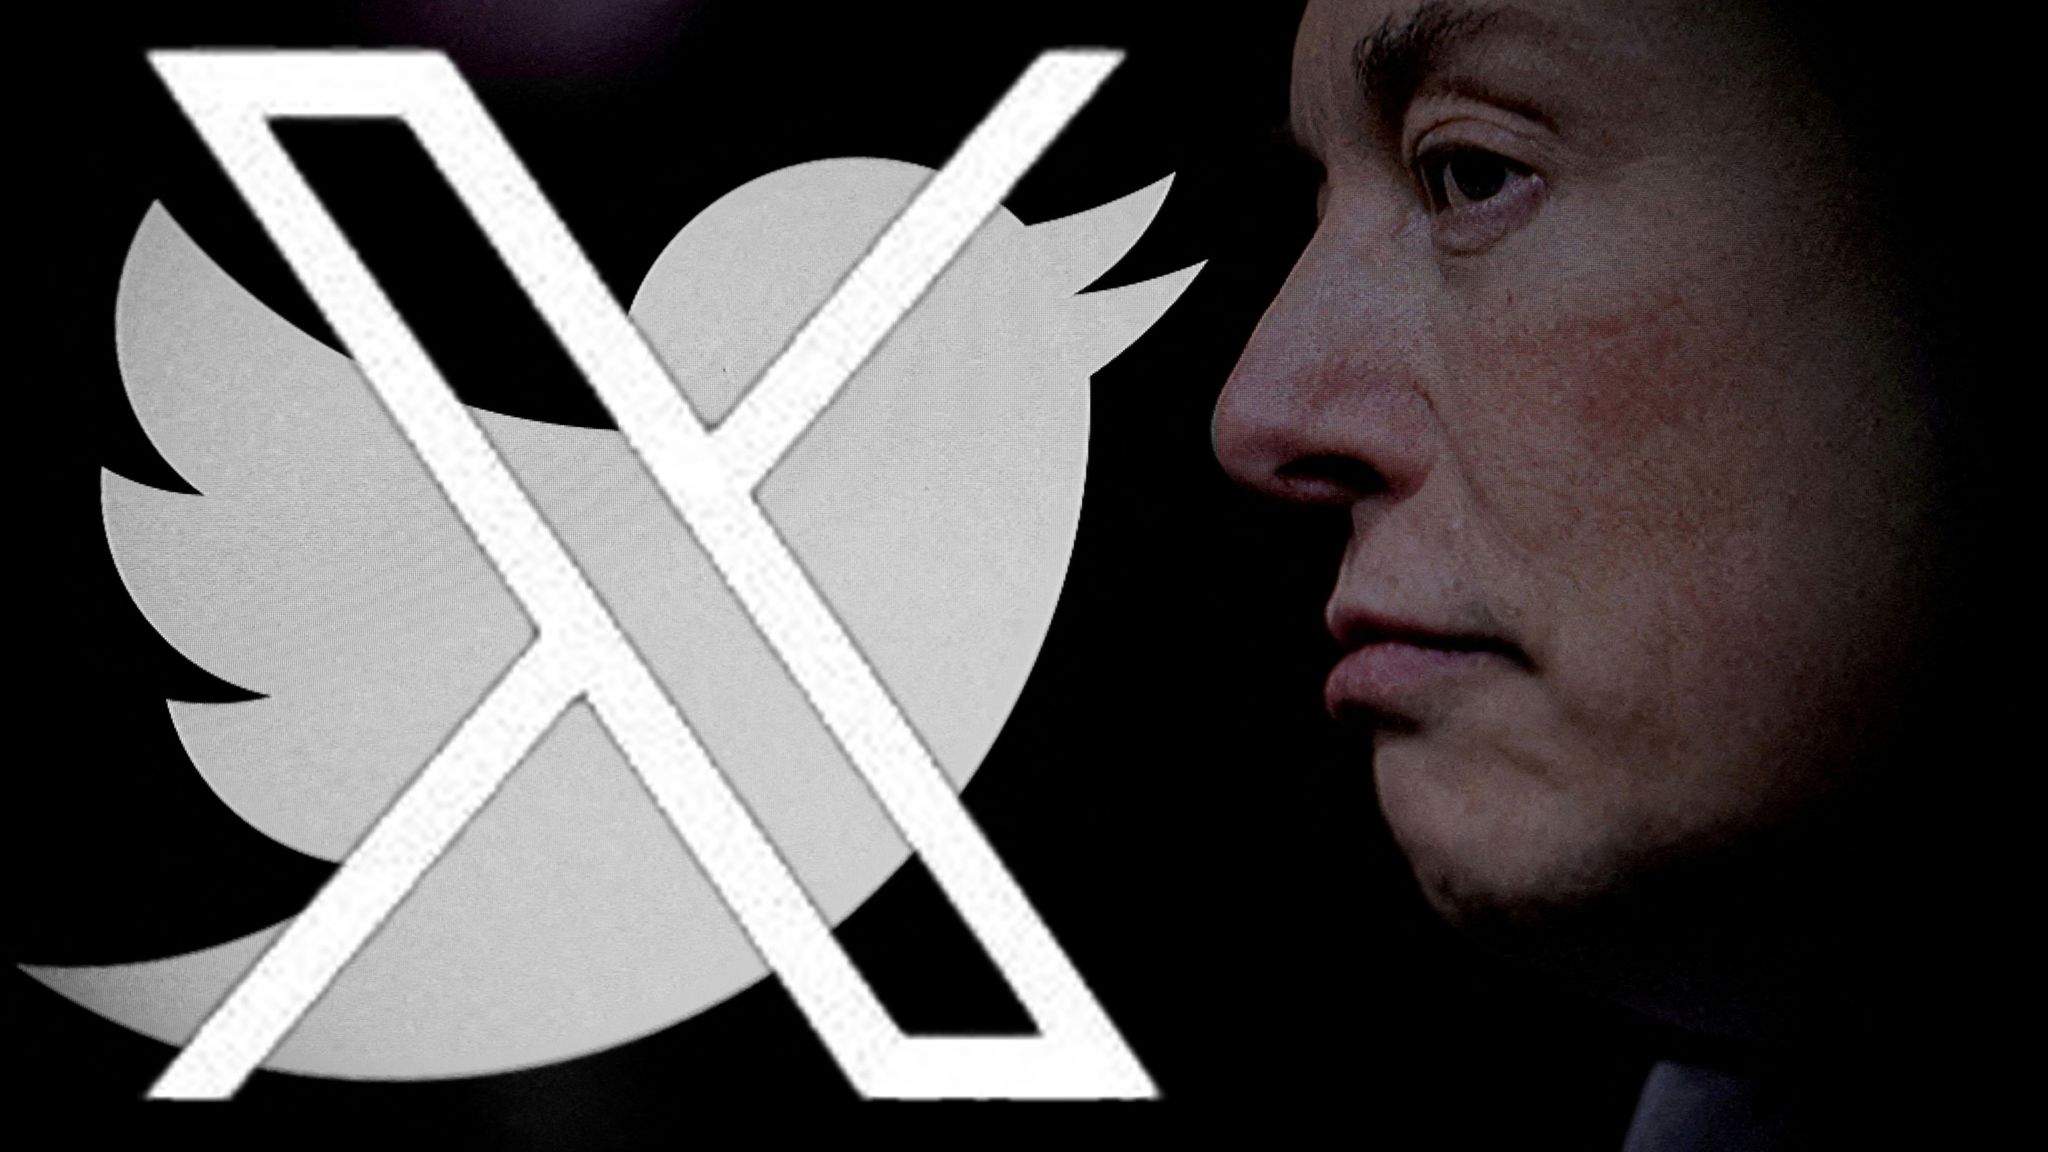 Elon Musk wants to rebrand Twitter - here's why it's going to be such an enormous challenge